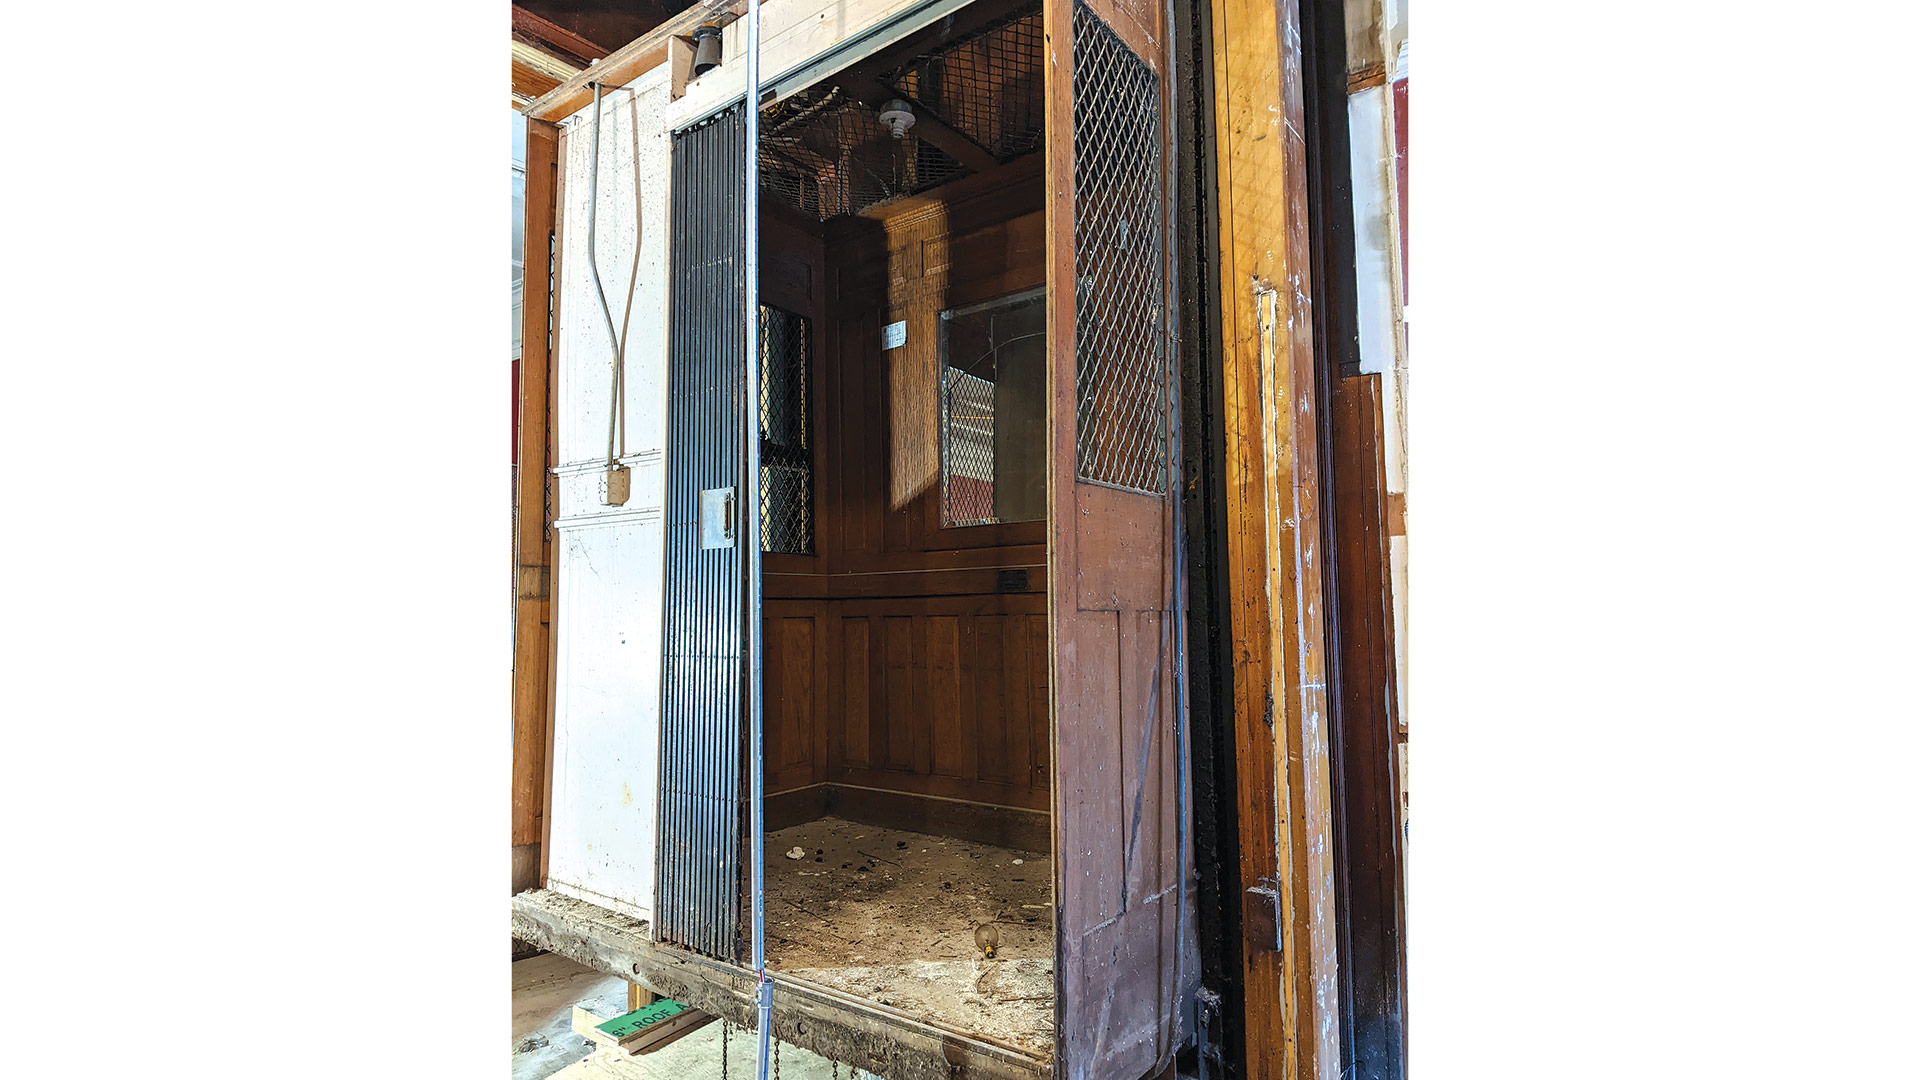 One of the current tasks is modernizing the original, 126-year-old hydraulic elevator.